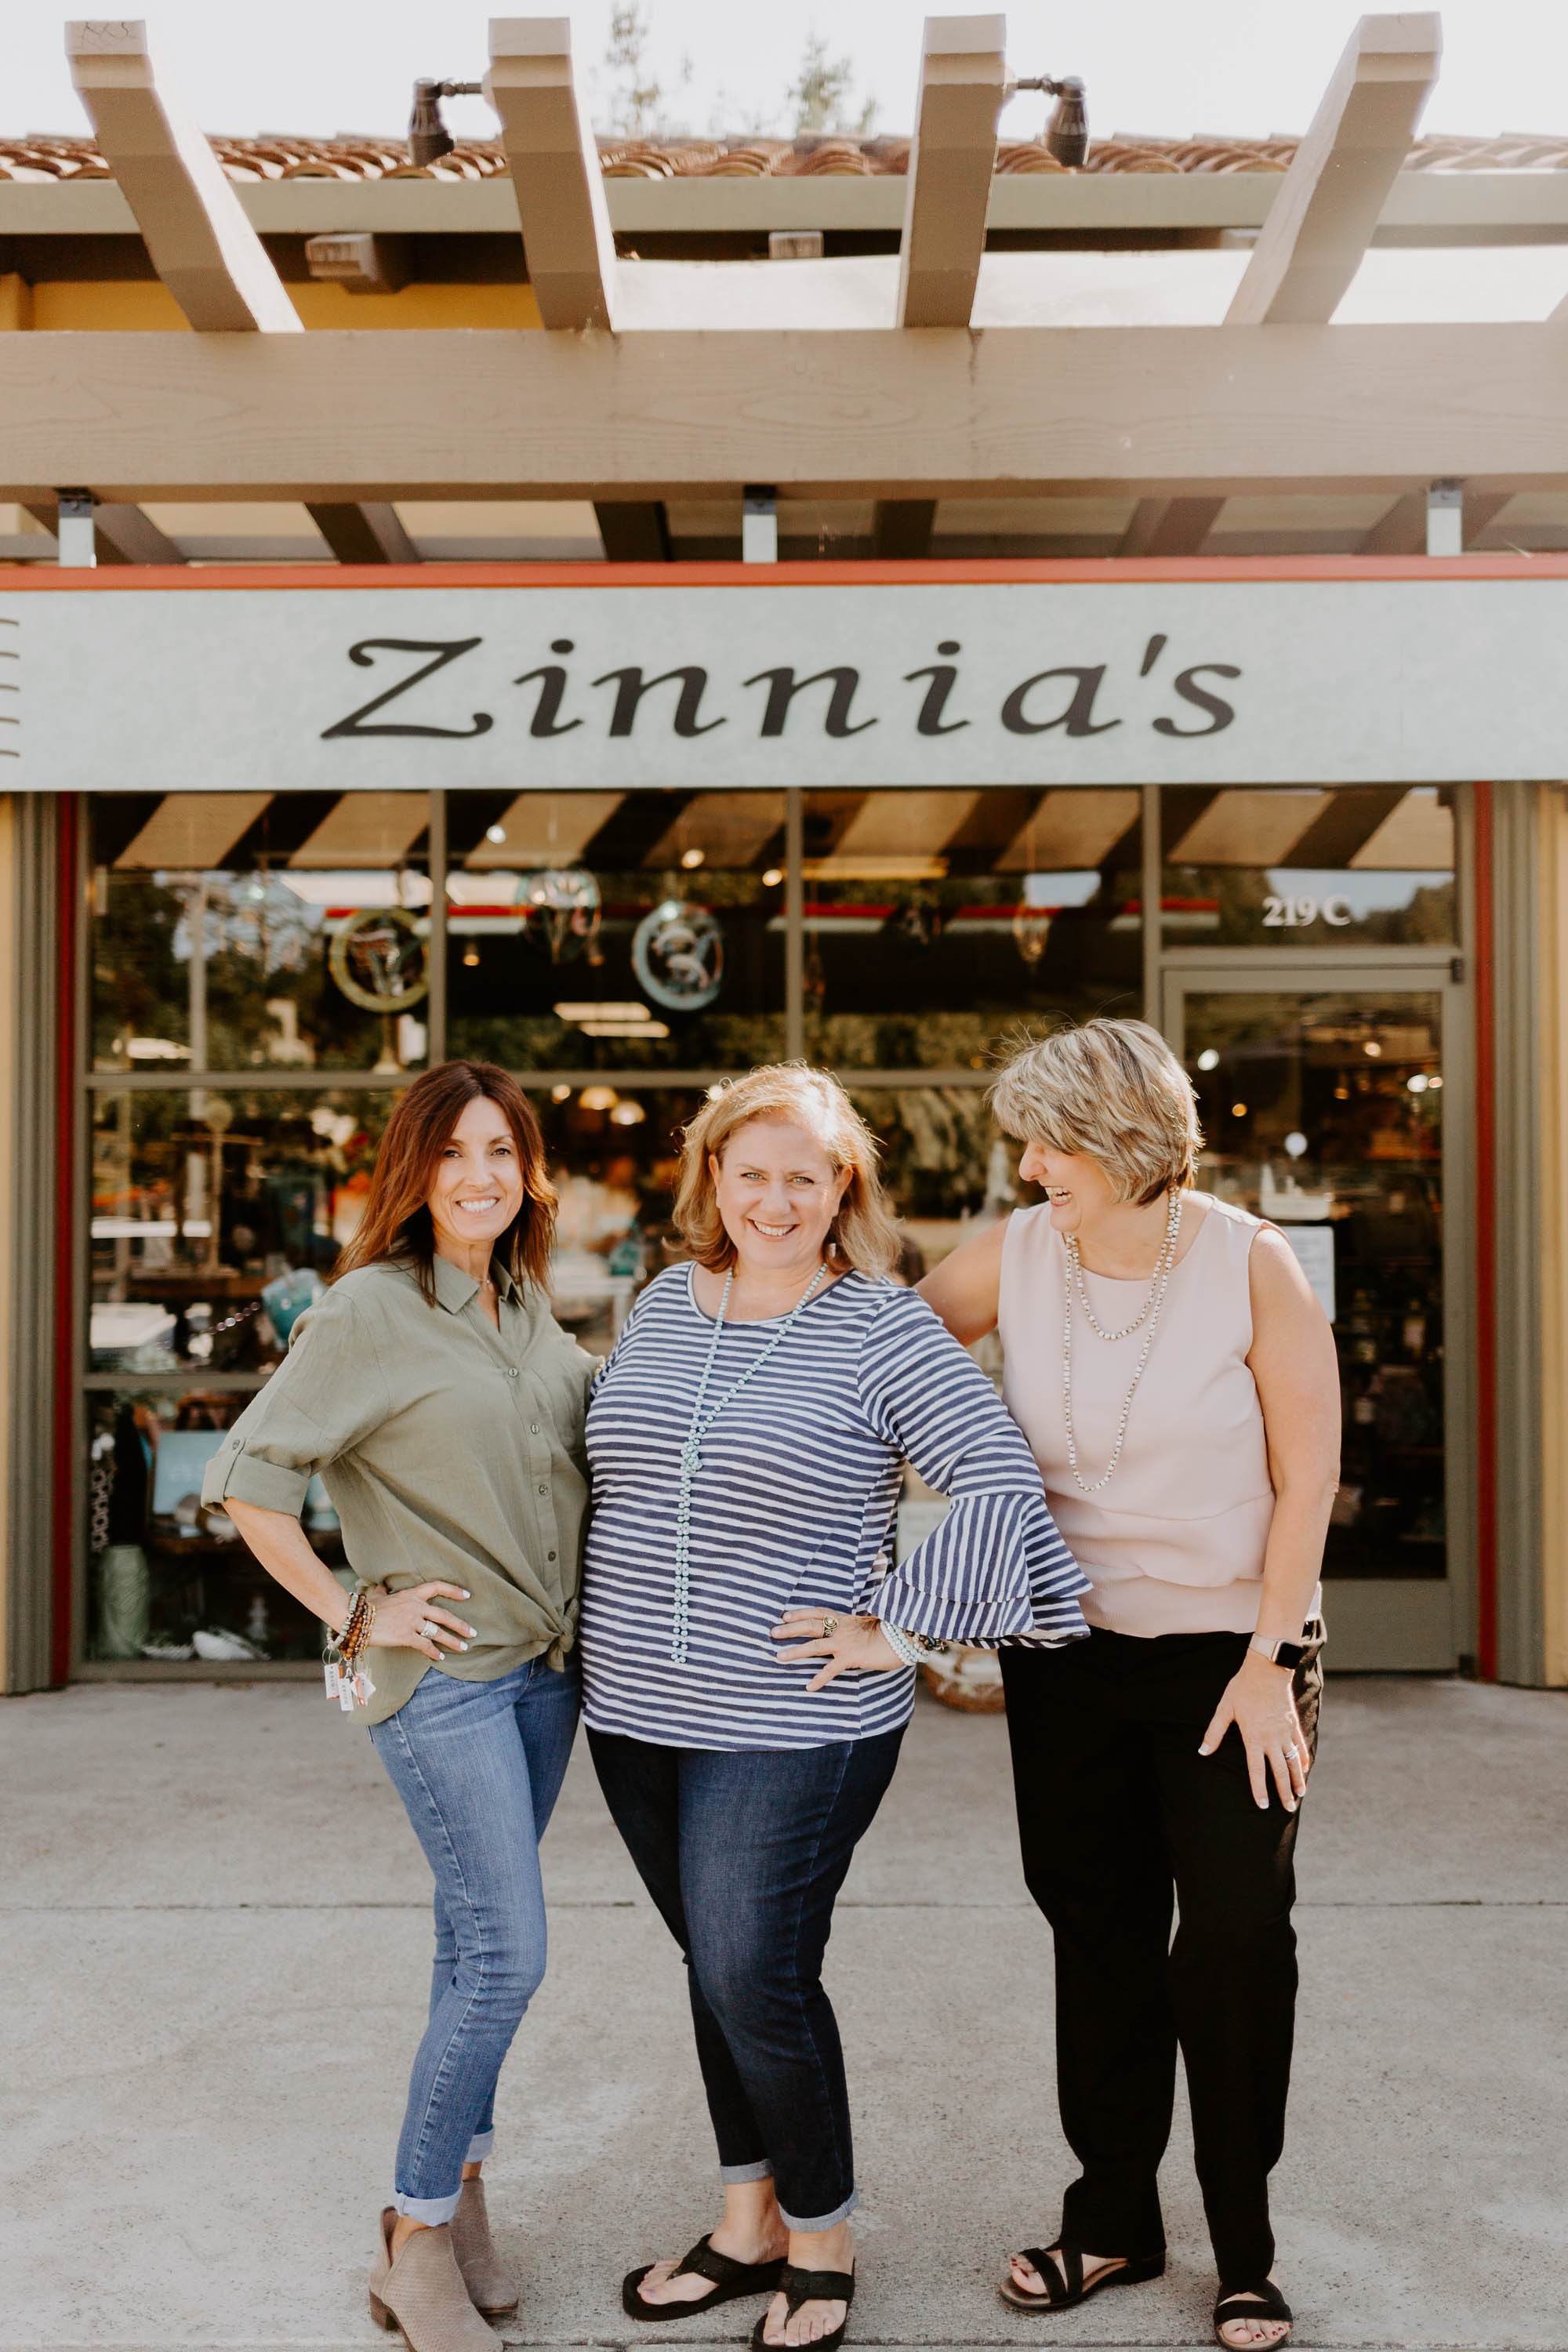 5 Days of Community Love at Zinnia's in Scotts Valley, California